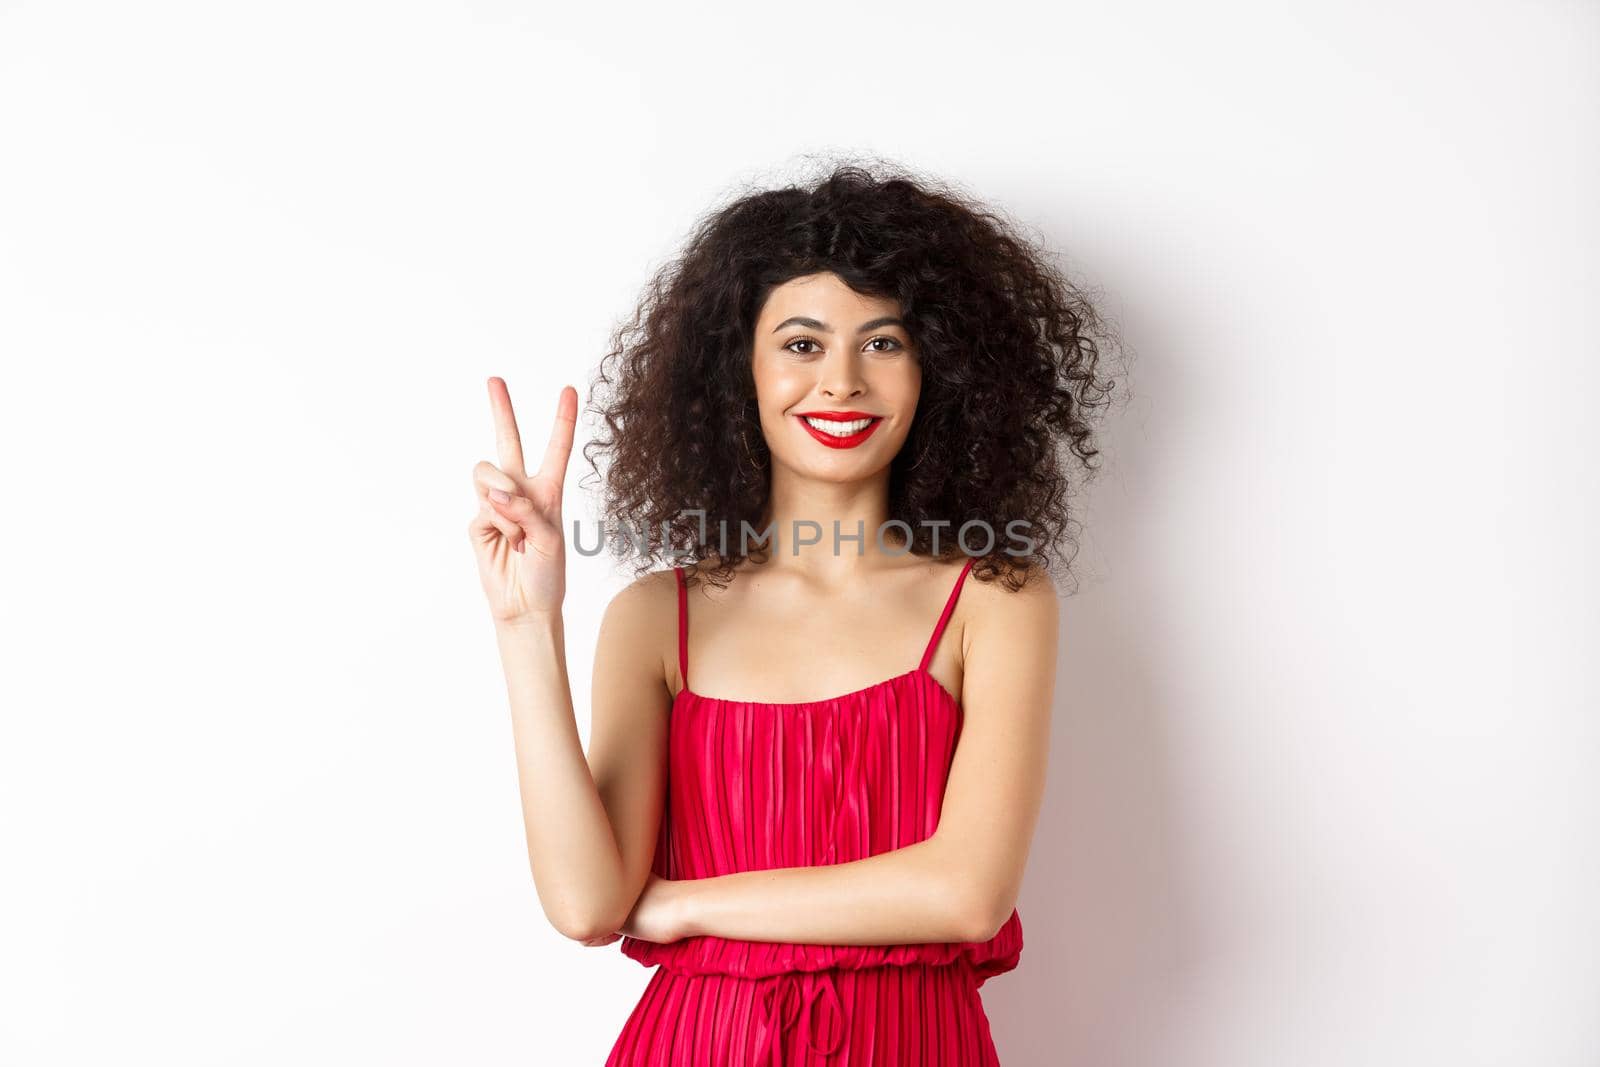 Attractive female model in red dress and makeup, showing number two and smiling, standing over white background.